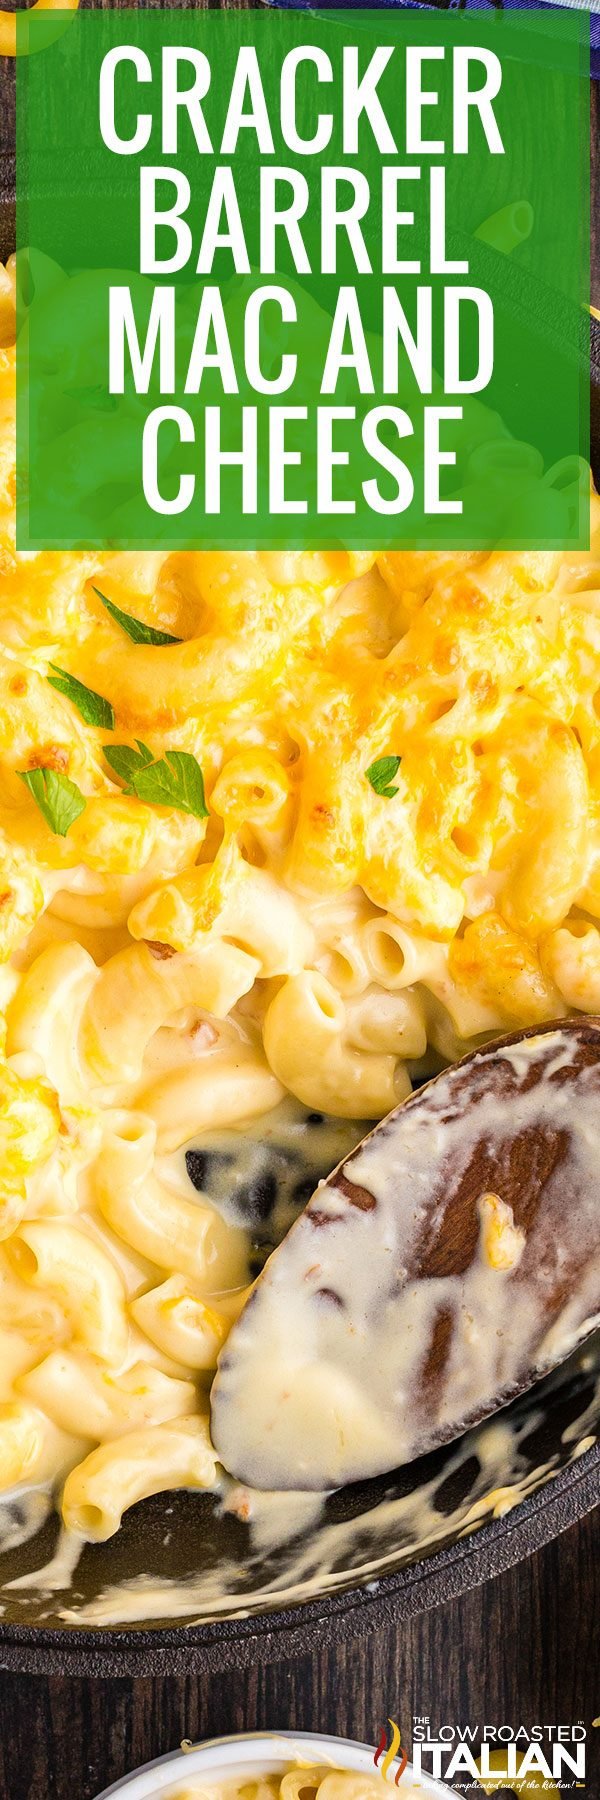 titled image (and shown): Cracker Barrel mac and cheese